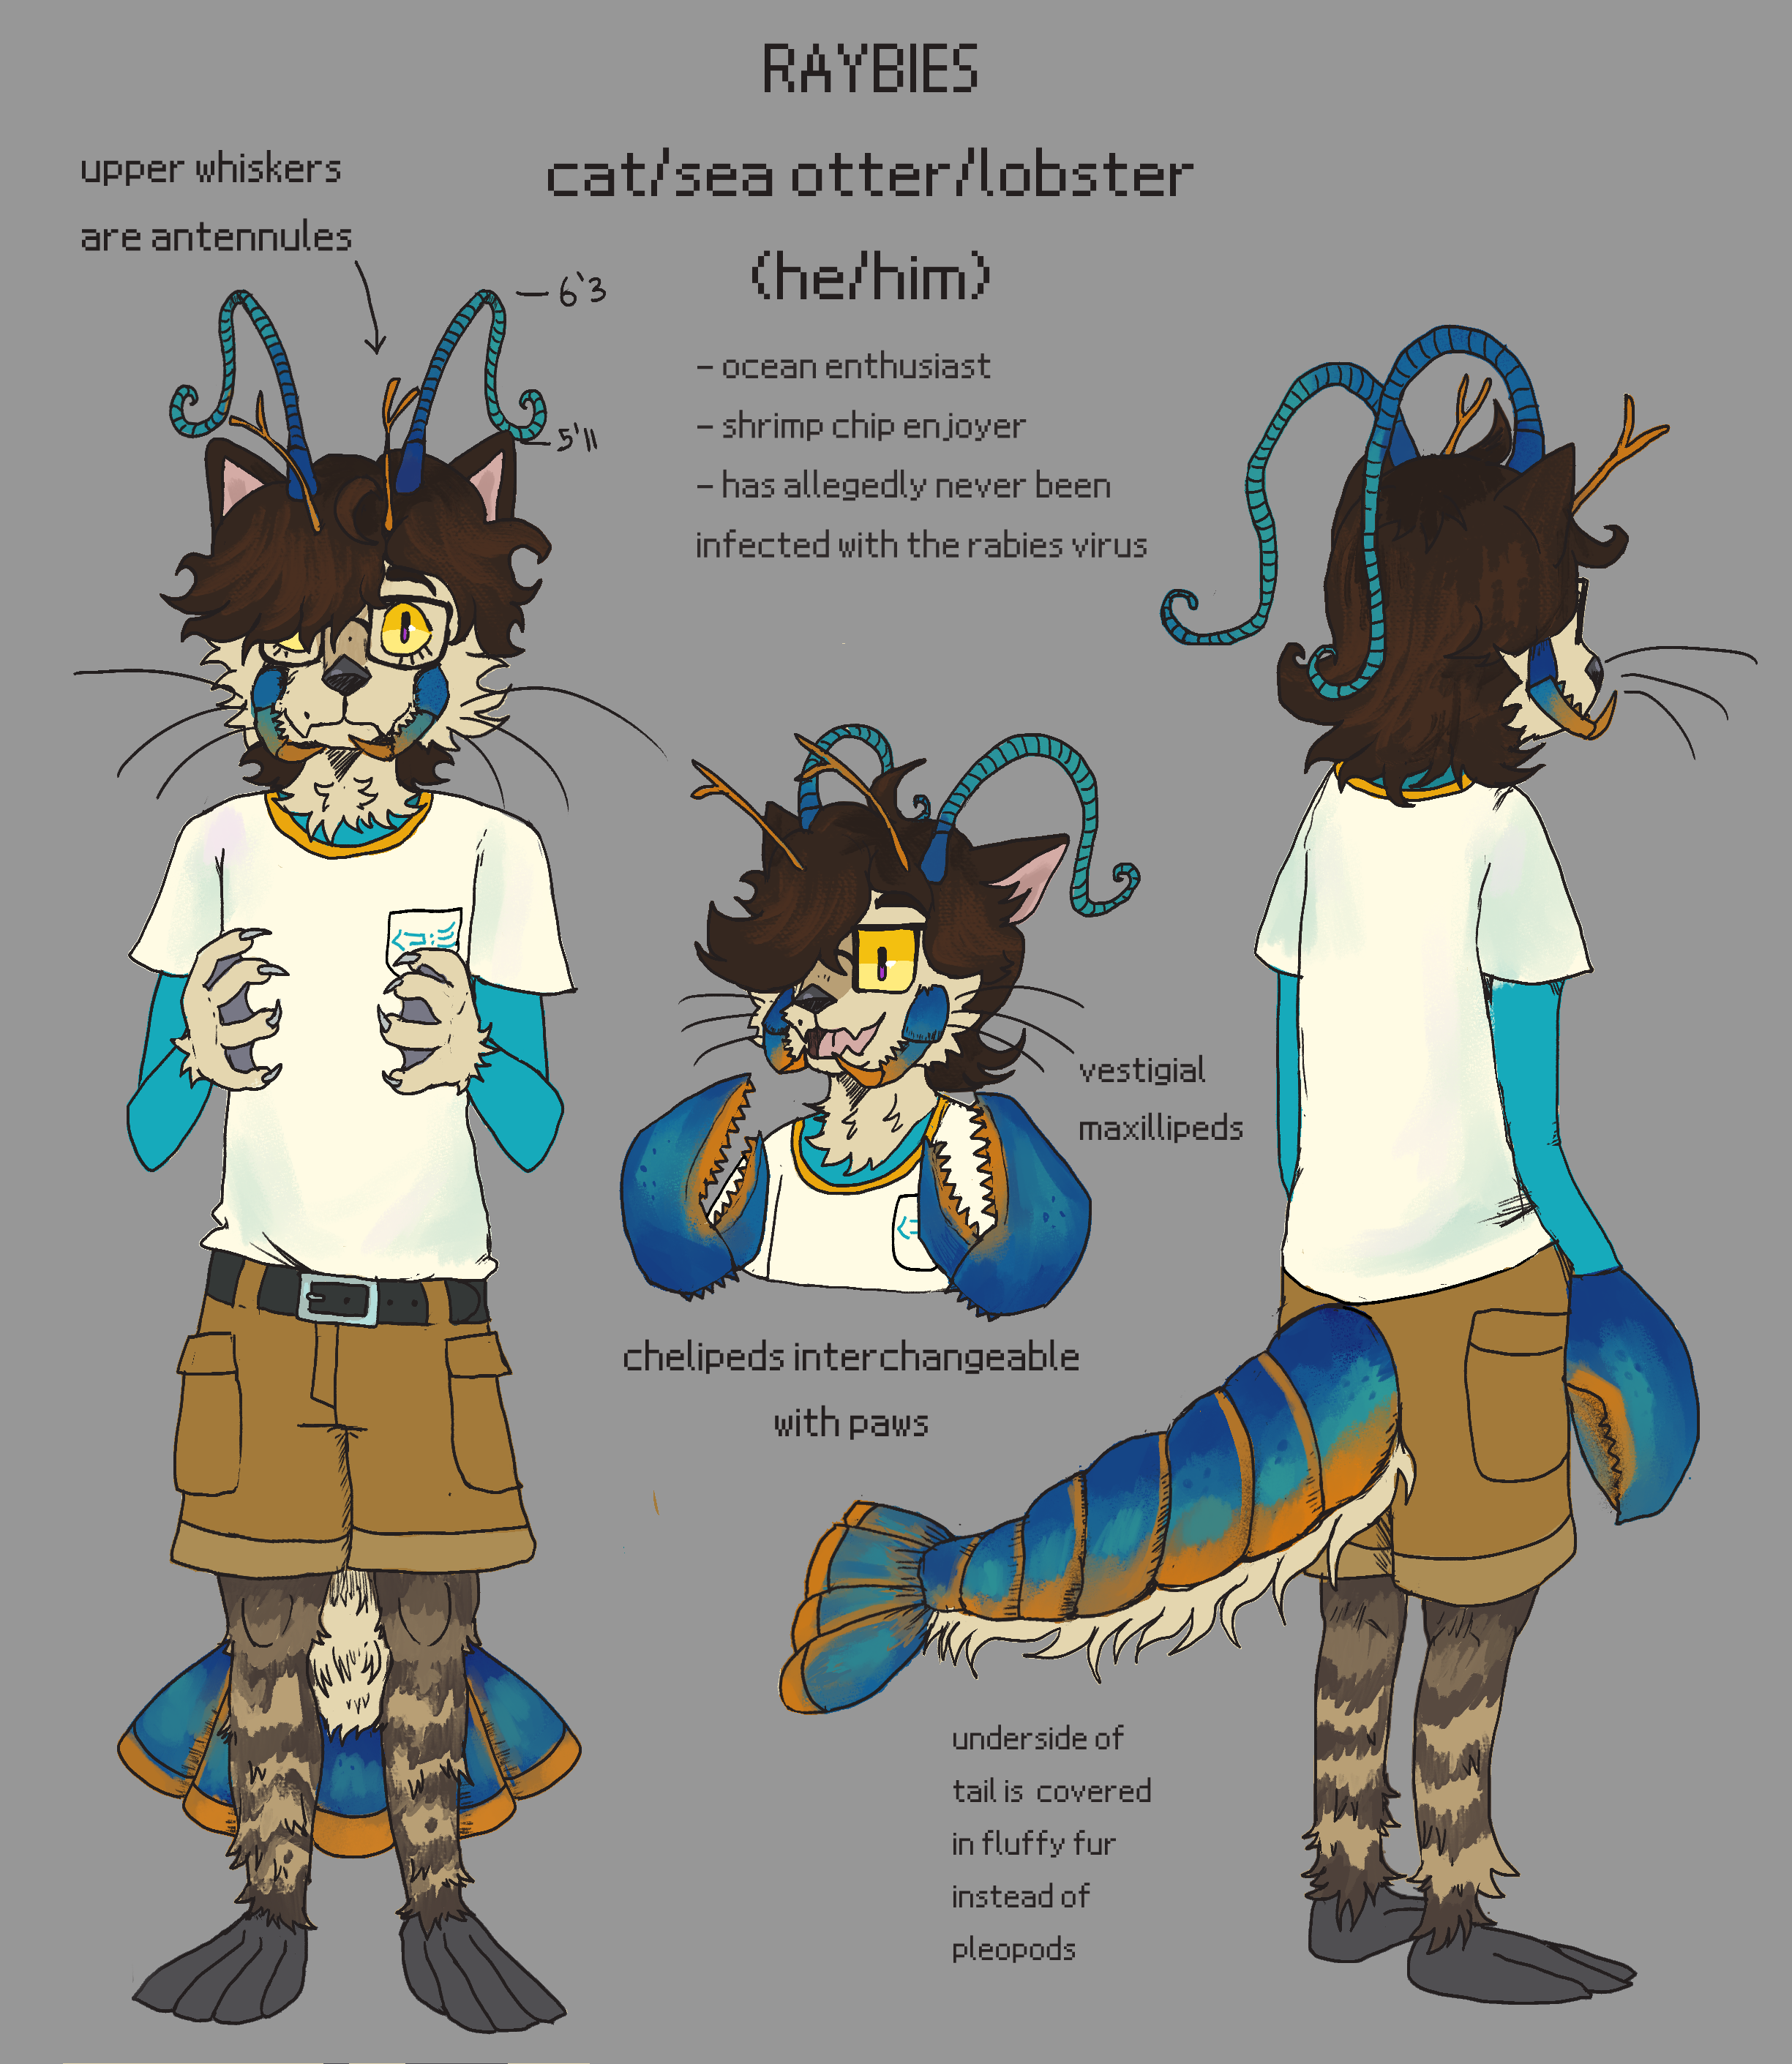 An illustration of an anthropomorphic cat sea otter lobster hybrid. The image has text, which reads 'RAYBIES. cat/sea otter/lobster. (he/him). ocean enthusiast, shrimp chip enjoyer, has allegedly never been infected with the rabies virus. (has) vestigial maxillipeds. chelipeds interchangeable with paws. upper whiskers are antennules. underside of tail is covered in fluffy fur instead of pleopods. 6'3 (at antennae), 5'11 (at ears).'